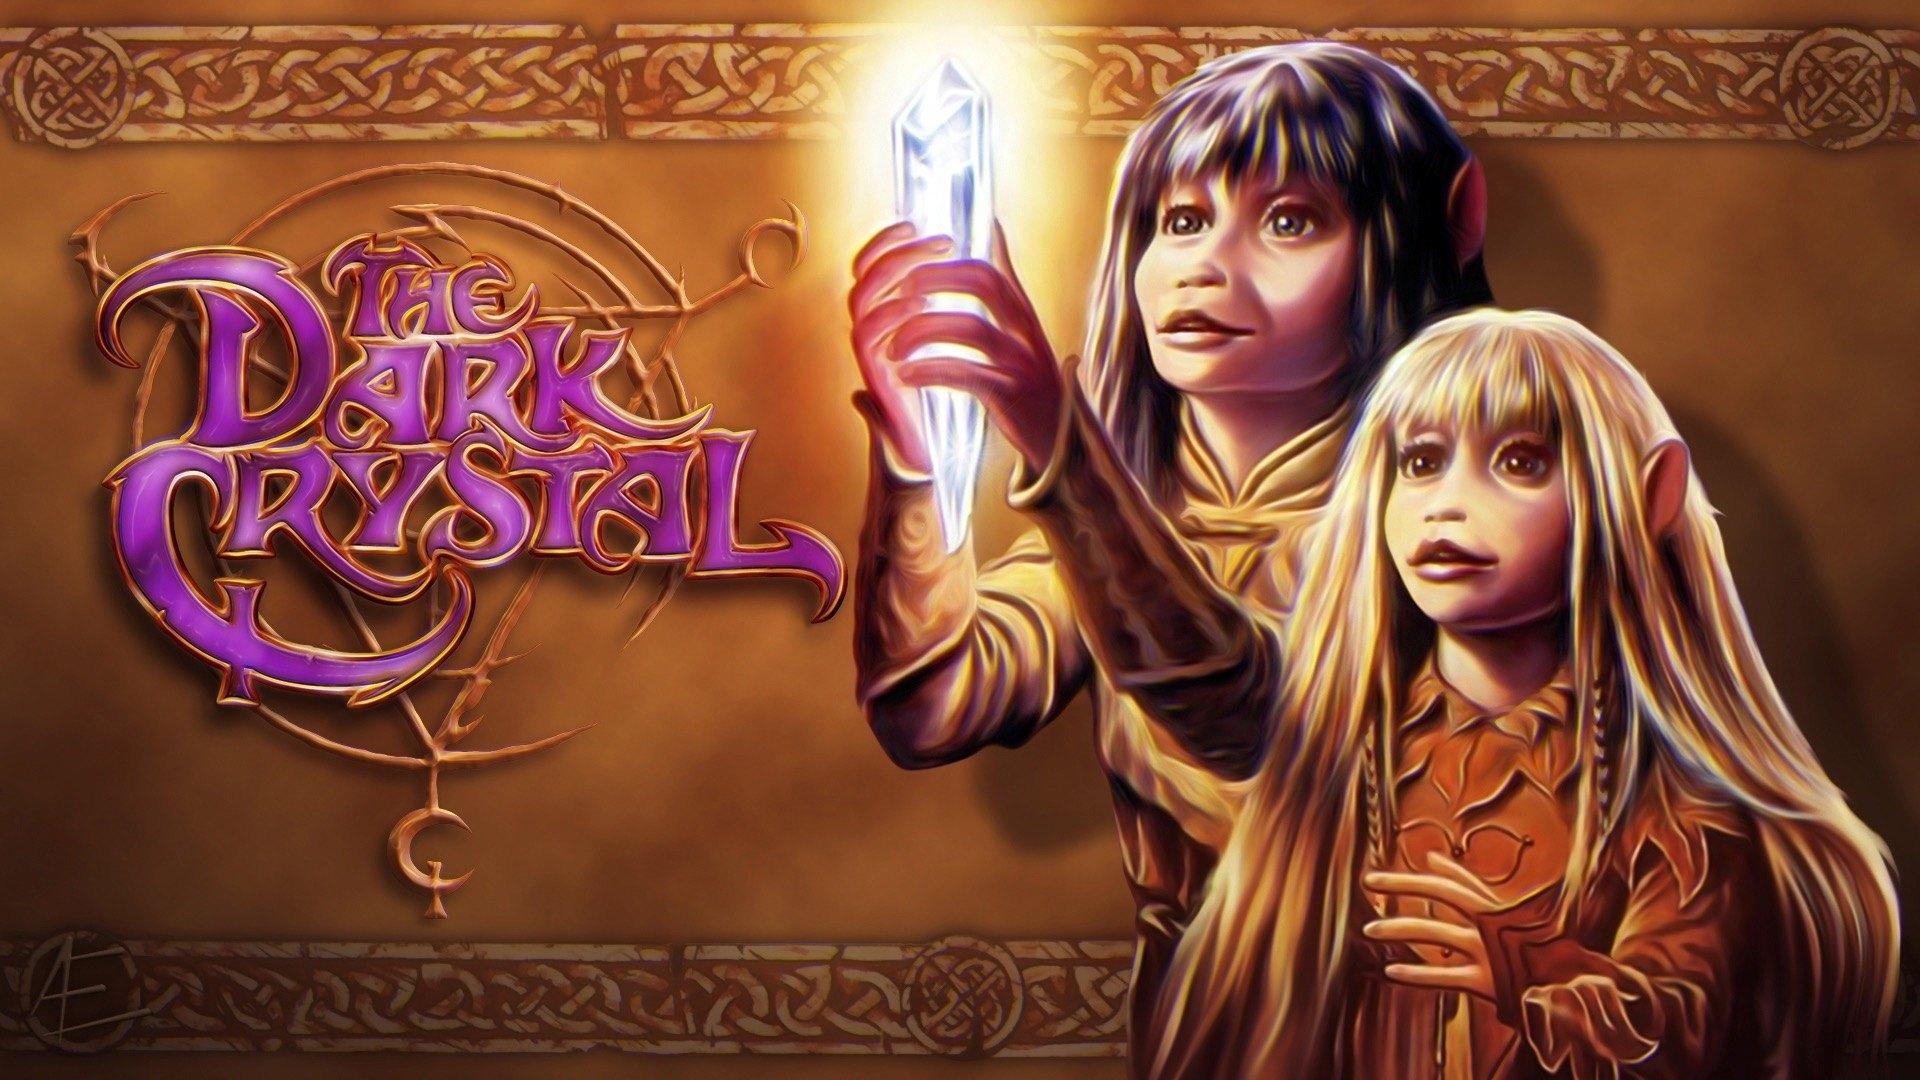 Brian Henson Teases New Details For The Dark Crystal: Age of Resistance